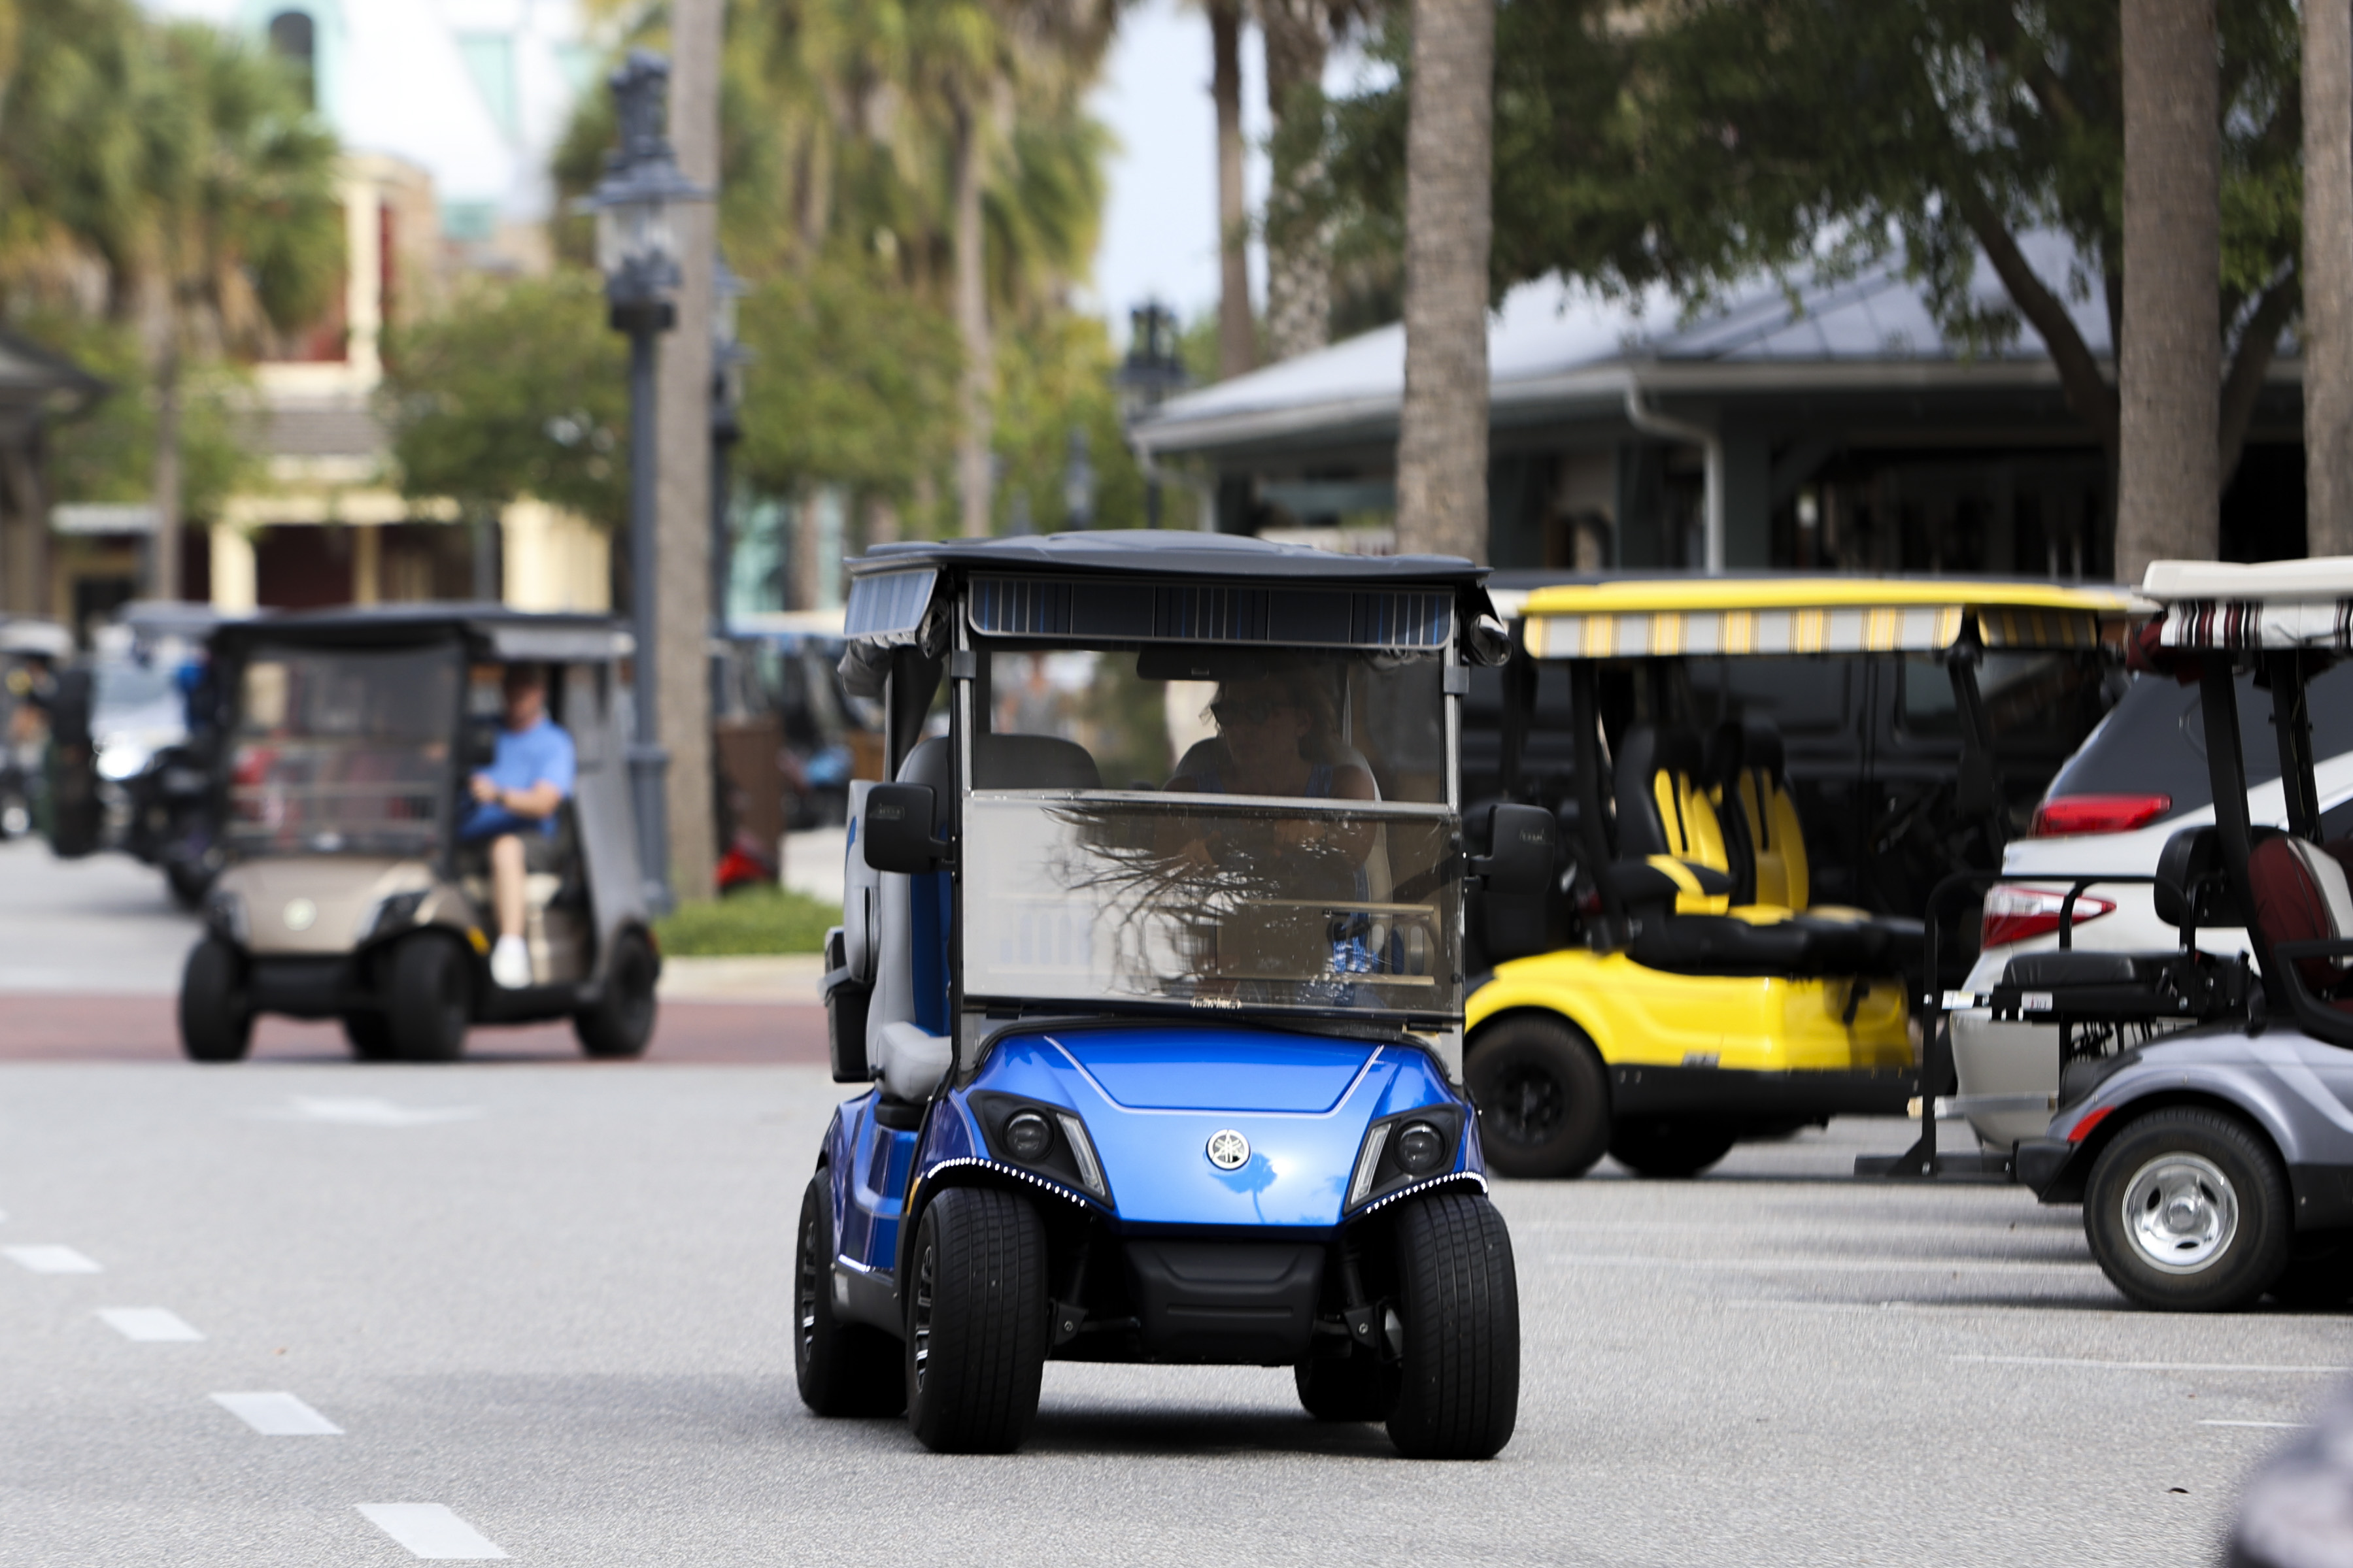 Do golf carts need license plates in Florida? Here's what to know.